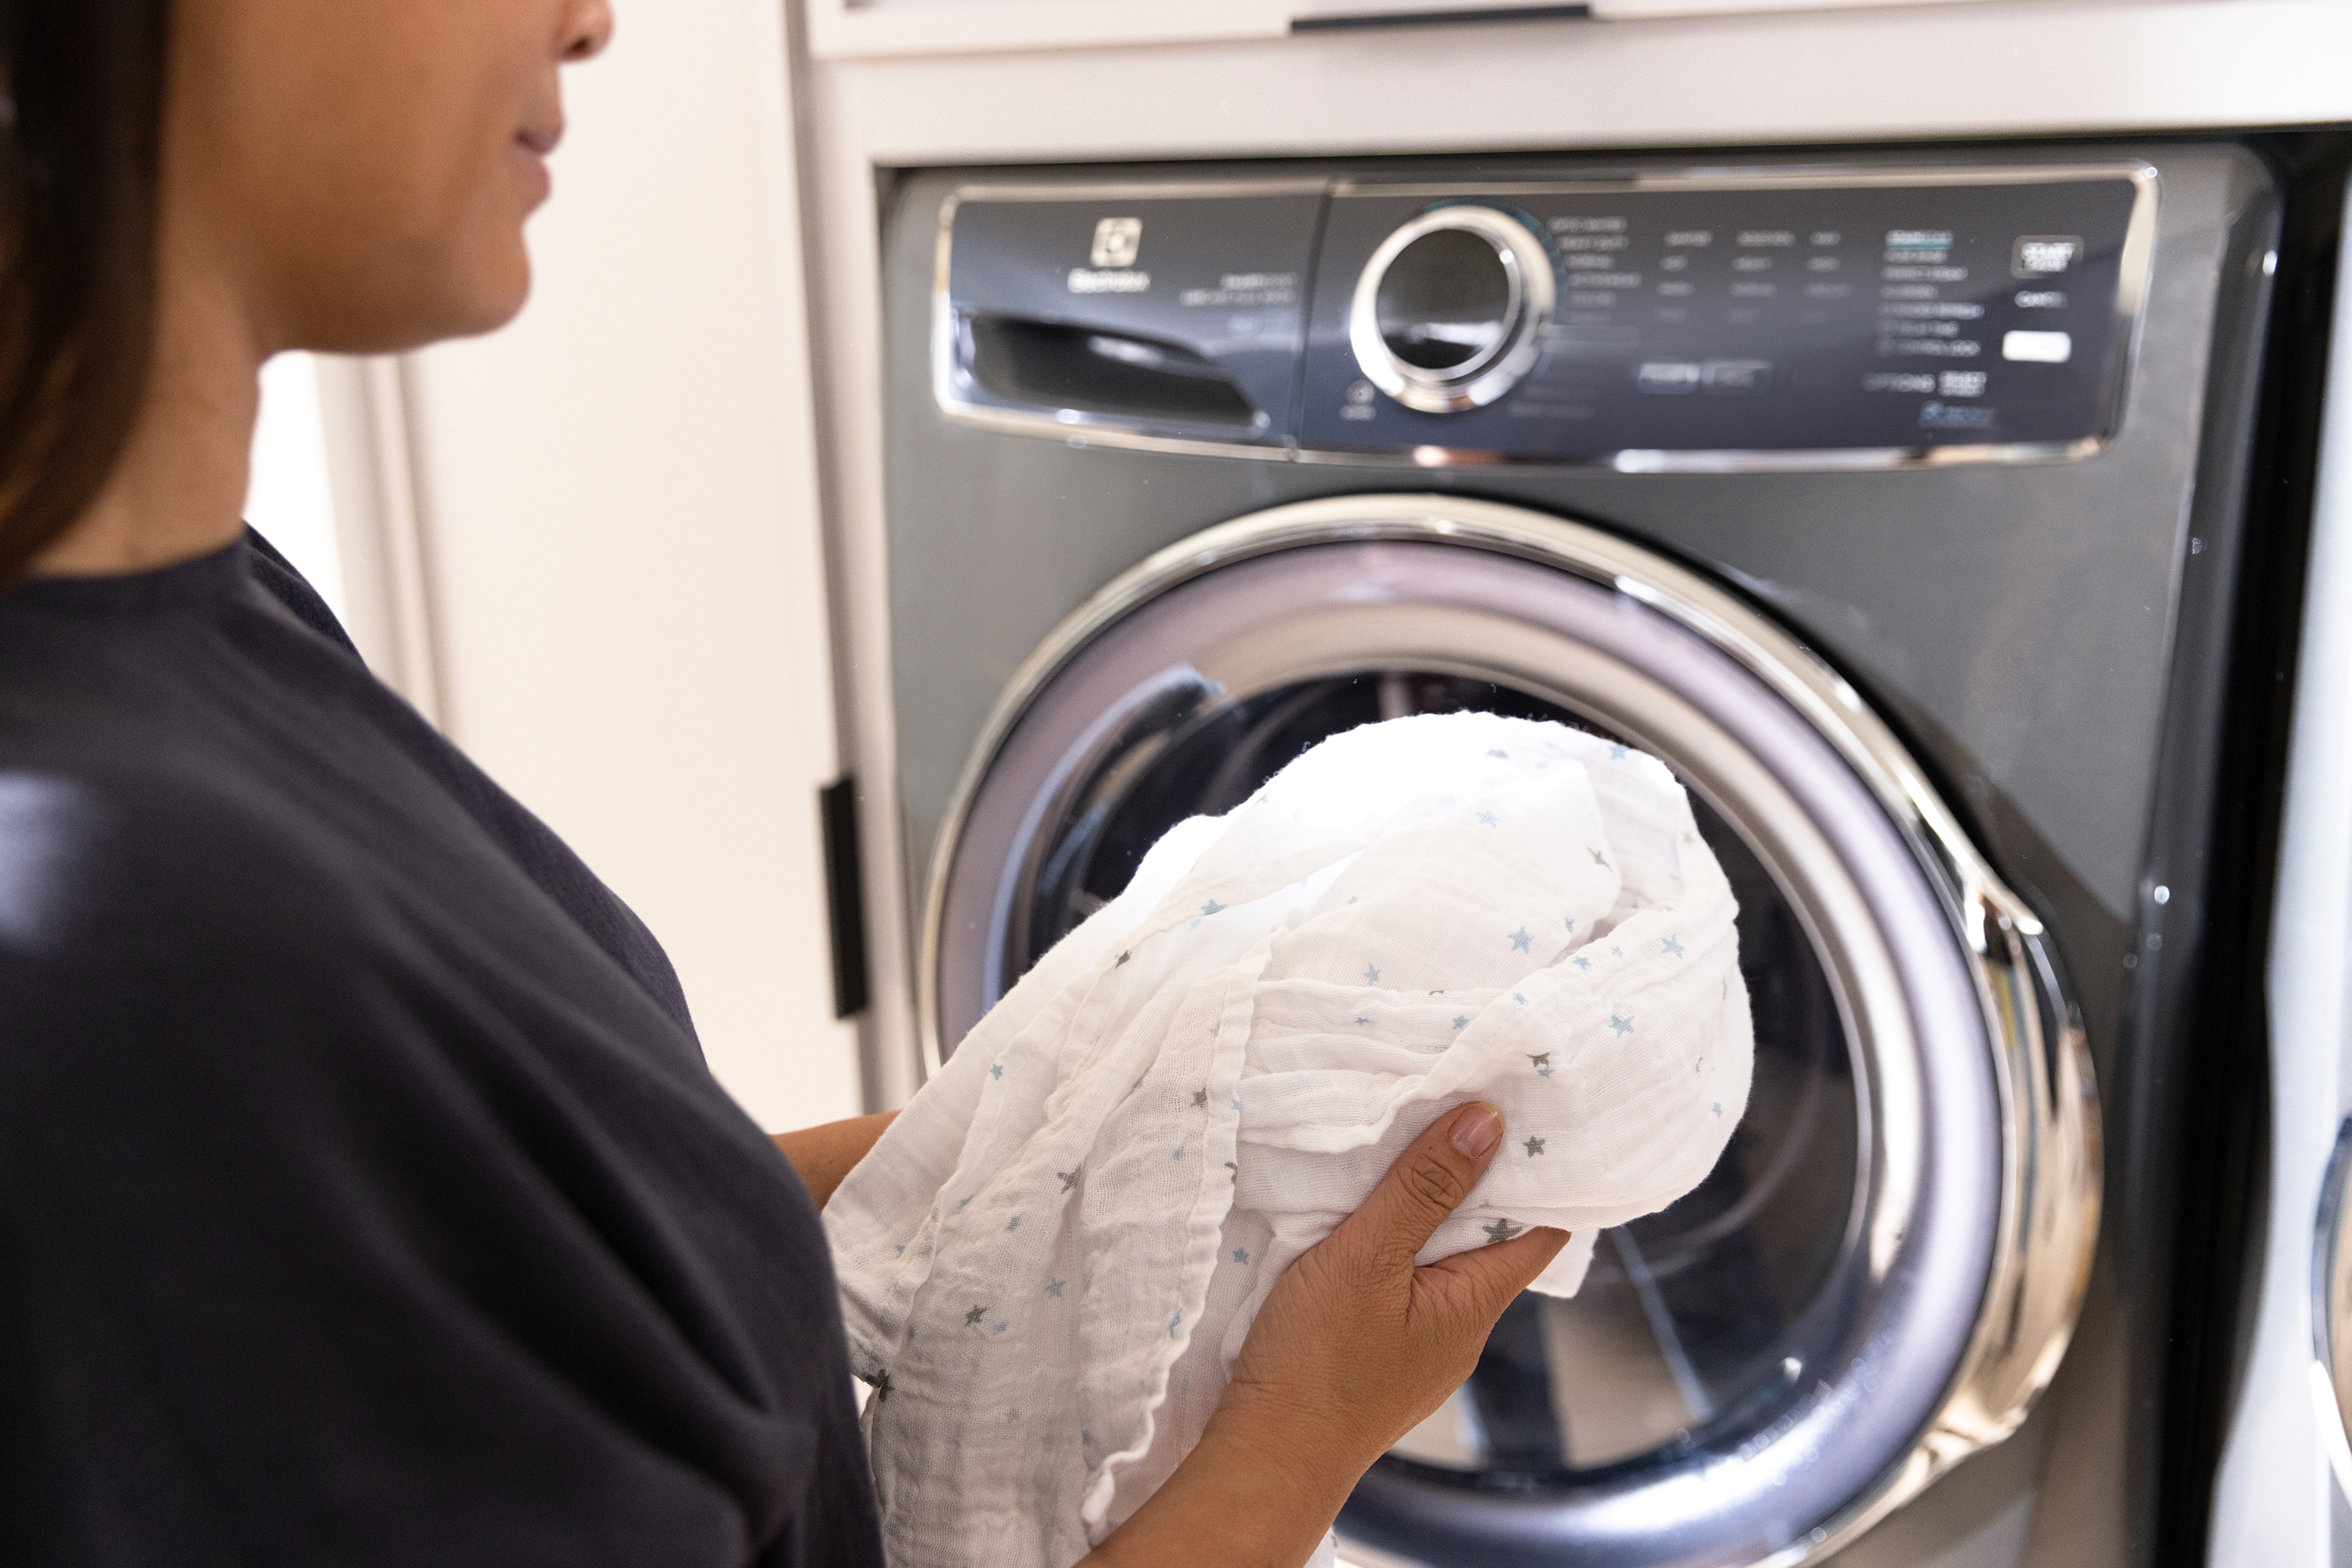 How to kill mold on a Front load washer You need: Bleach Gloves